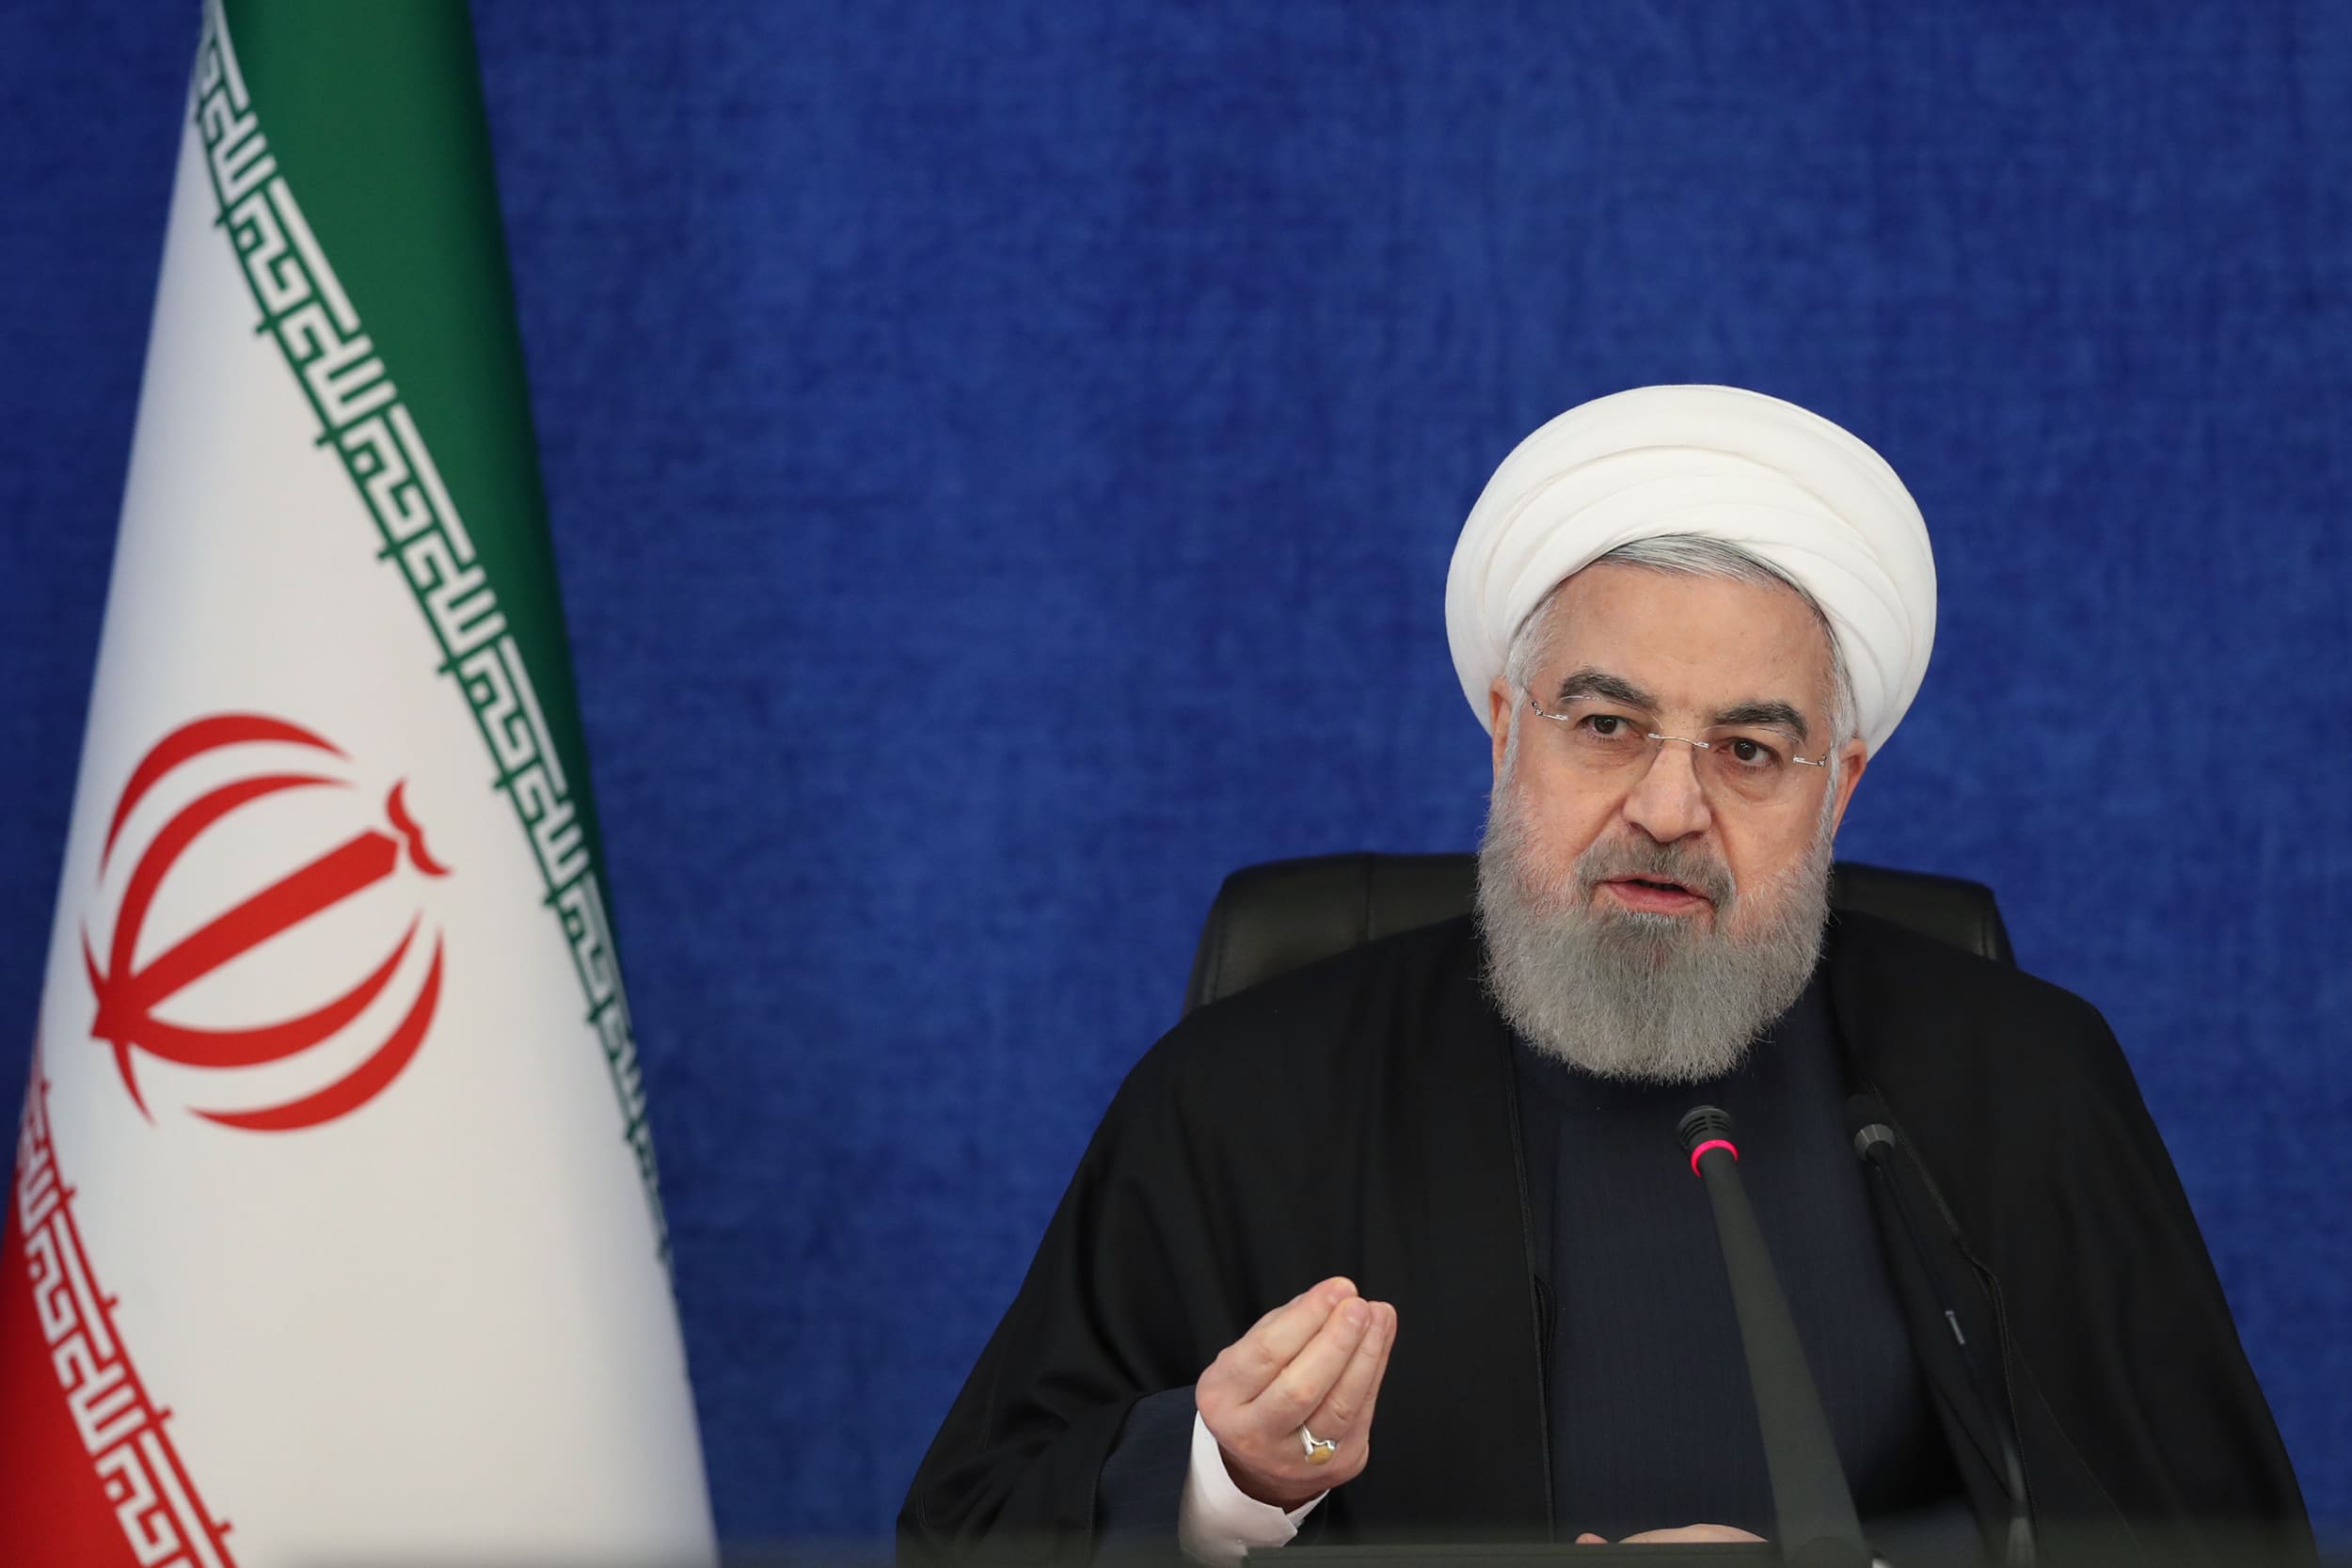 Iran's president accuses Israel of killing nuclear scientist, vows to respond 'at the proper time'